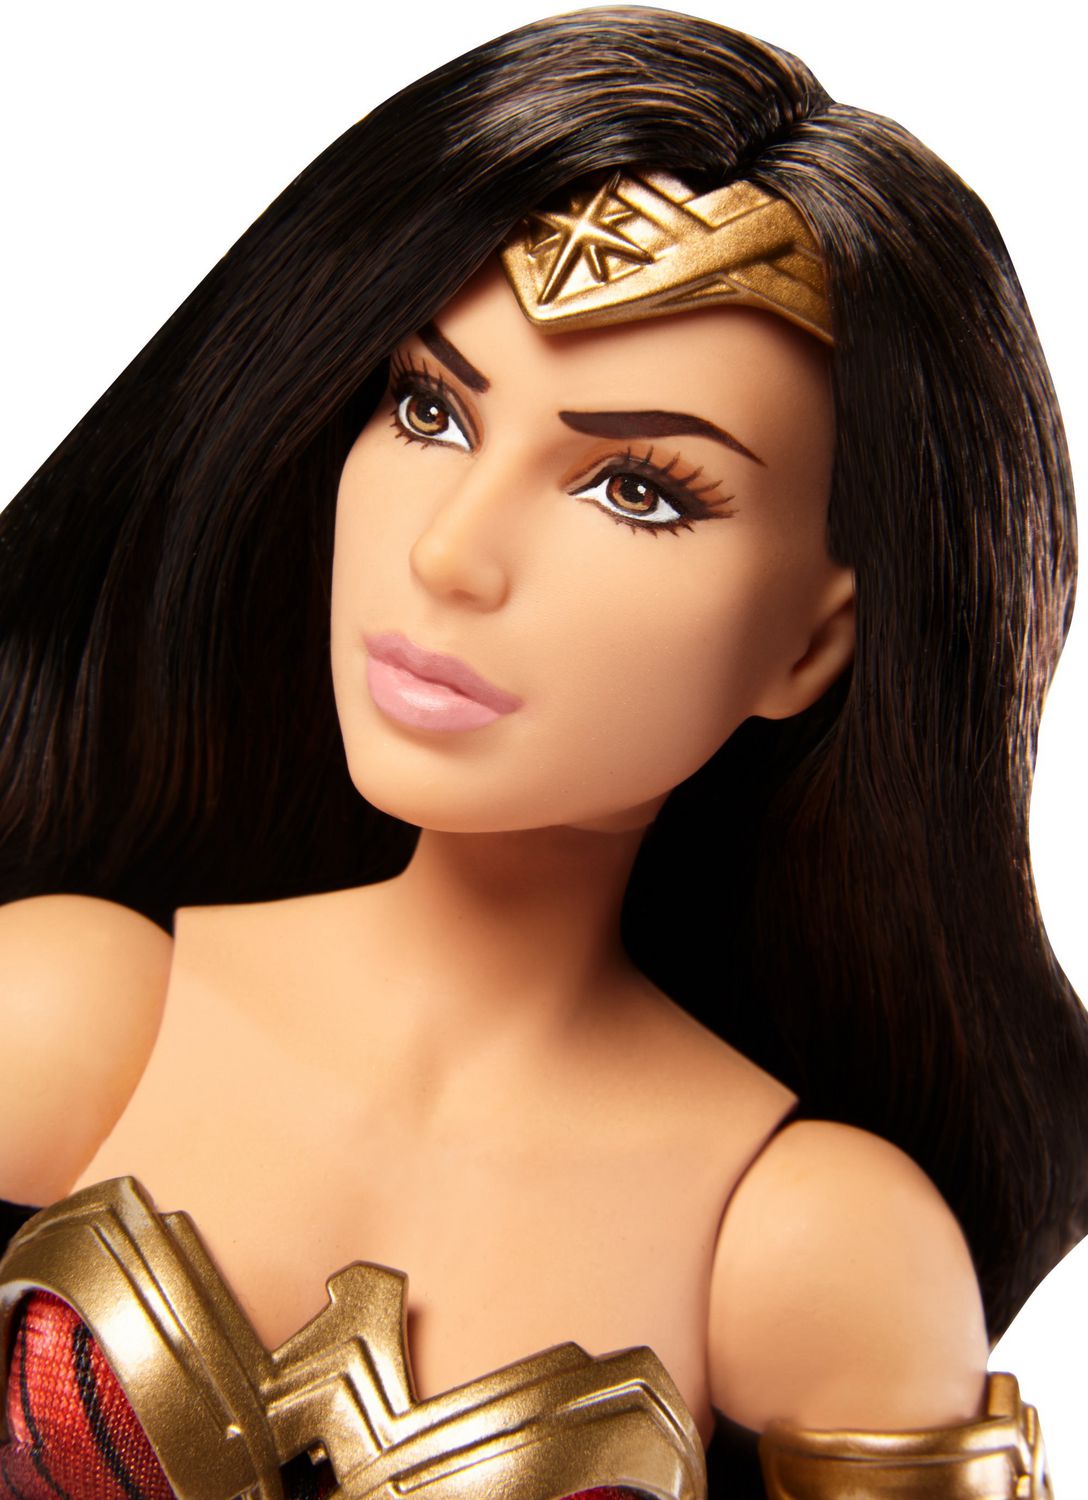 Wonder Woman Battle Ready Doll Top Sellers, 52% OFF | lagence.tv